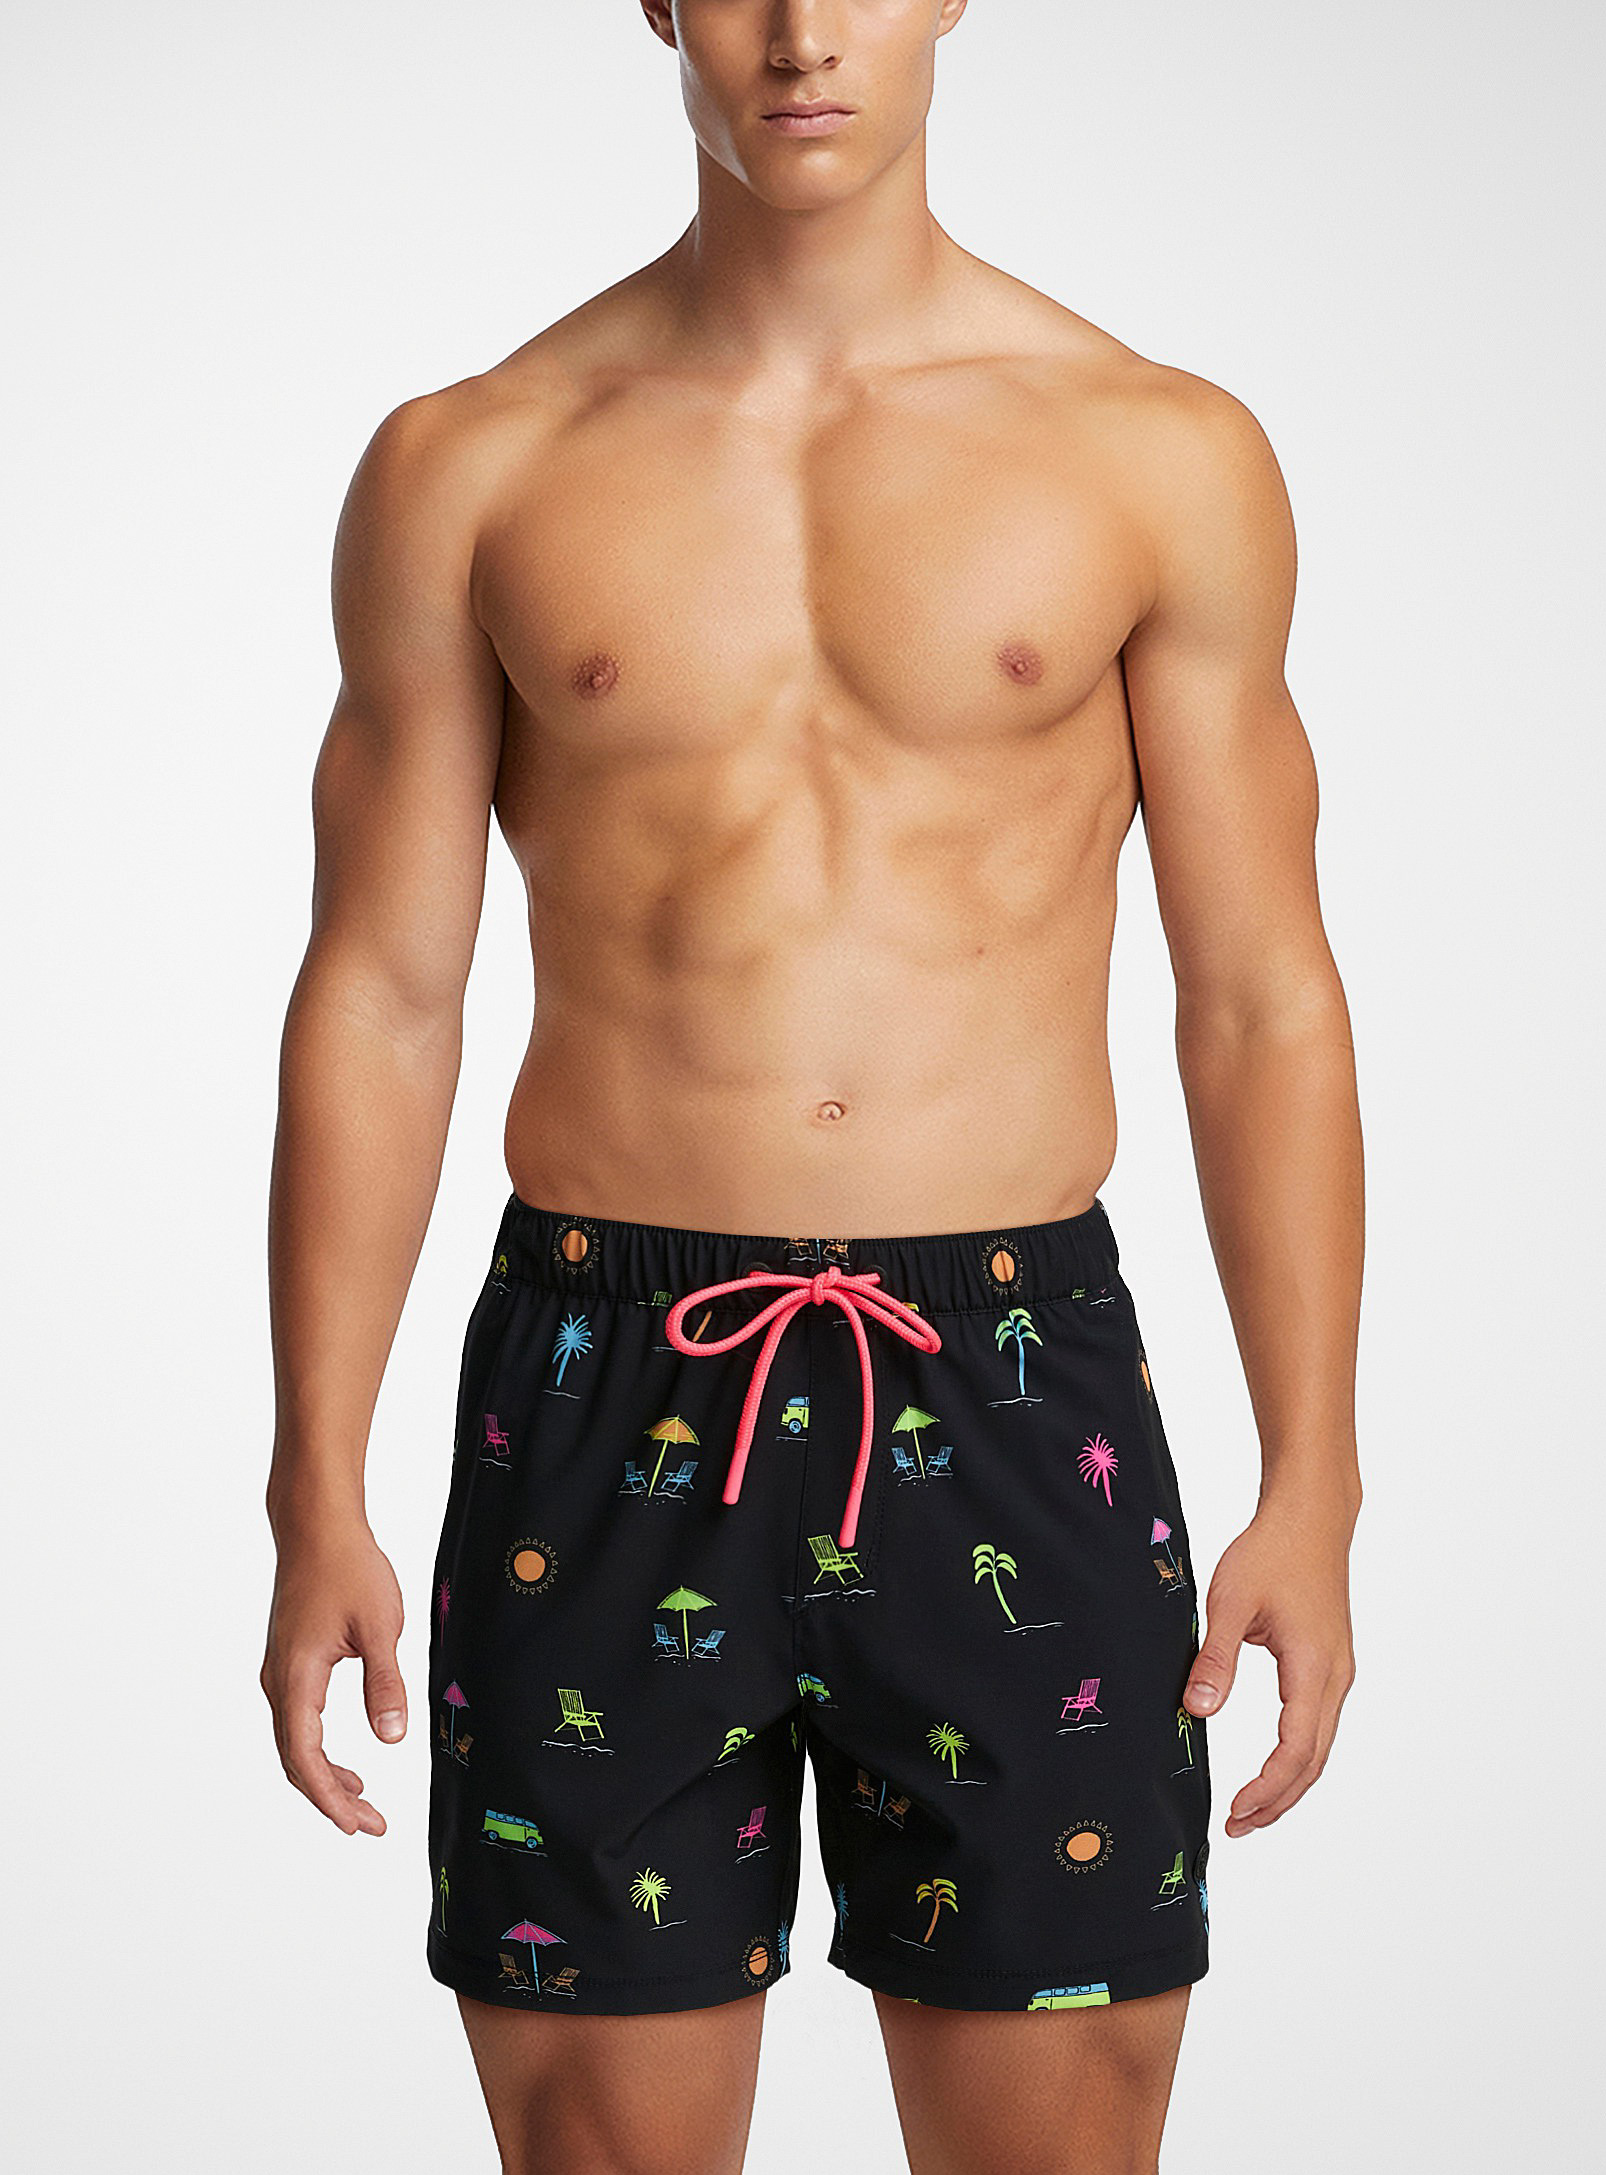 Everyday Sunday Summer Elements Swim Trunk In Patterned Black